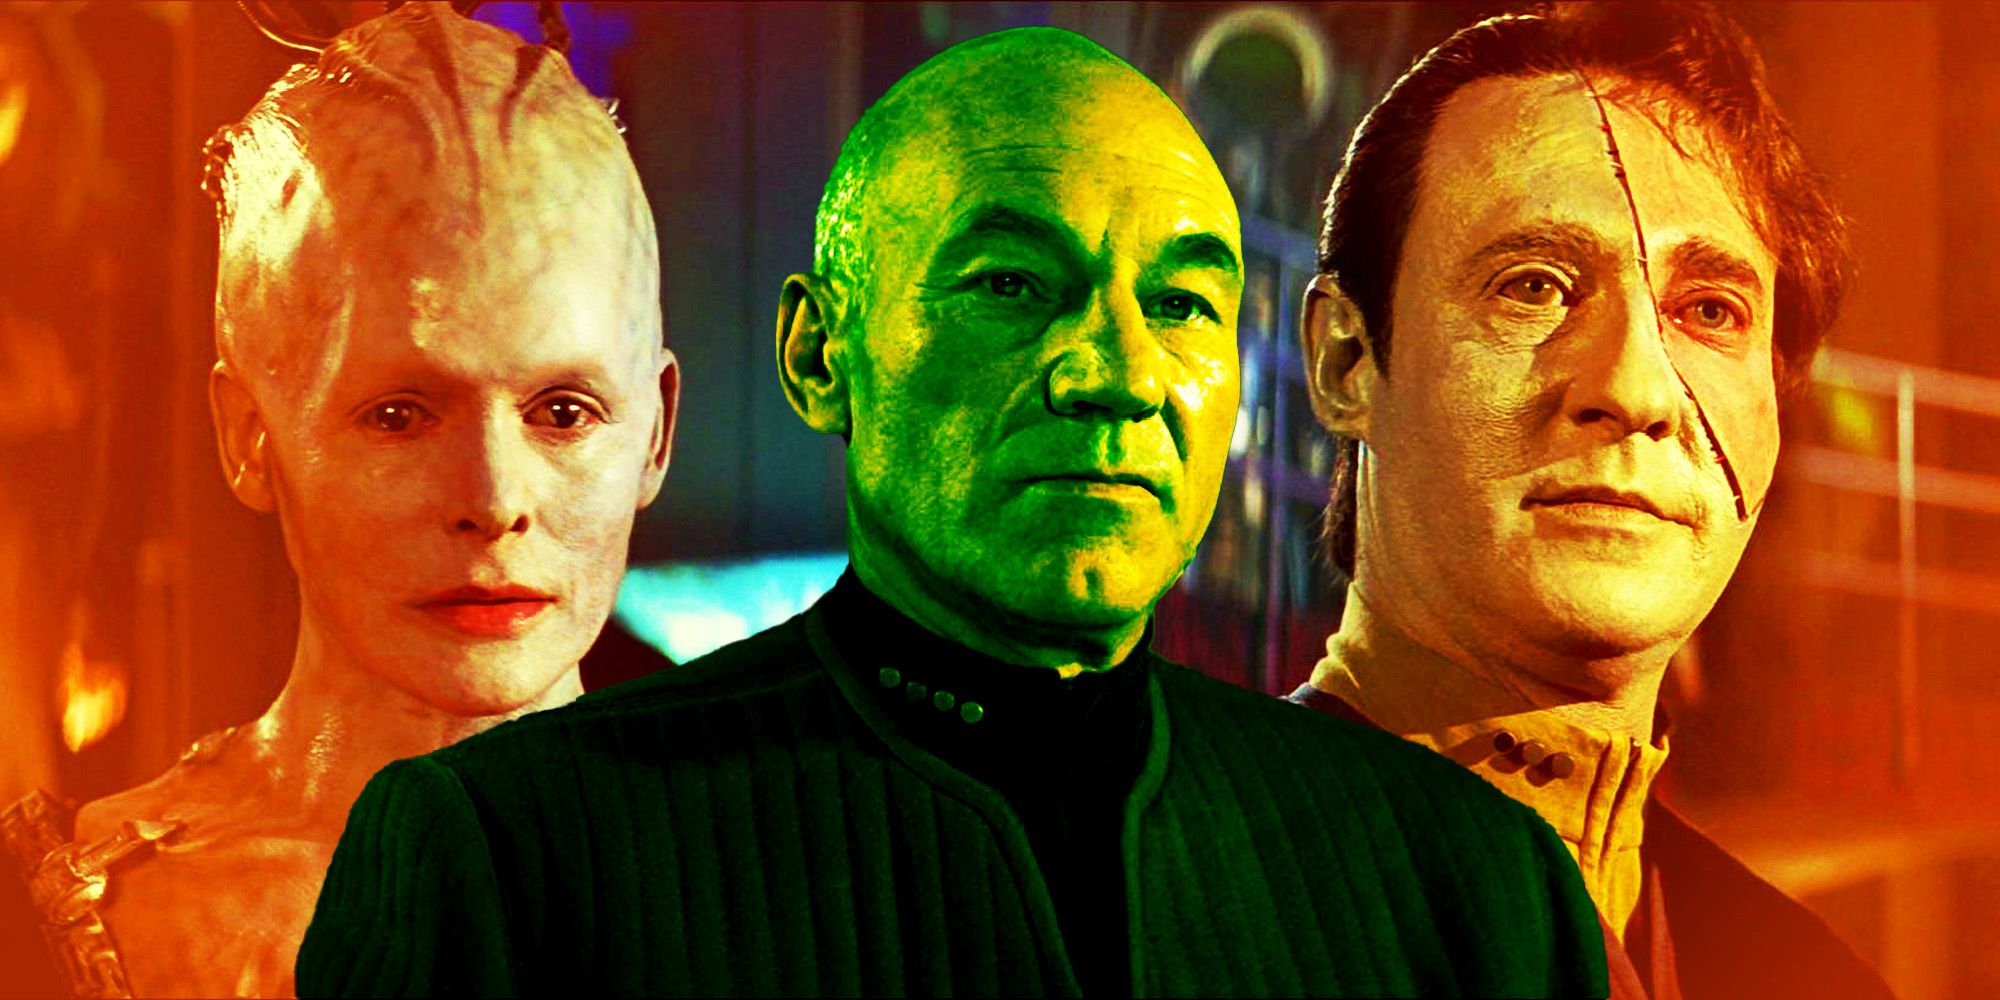 Alice Krige as the Borg Queen, Patrick Stewart as Jean-Luc Picard and Brent Spiner as Data, with a portion of organic flesh on his face.